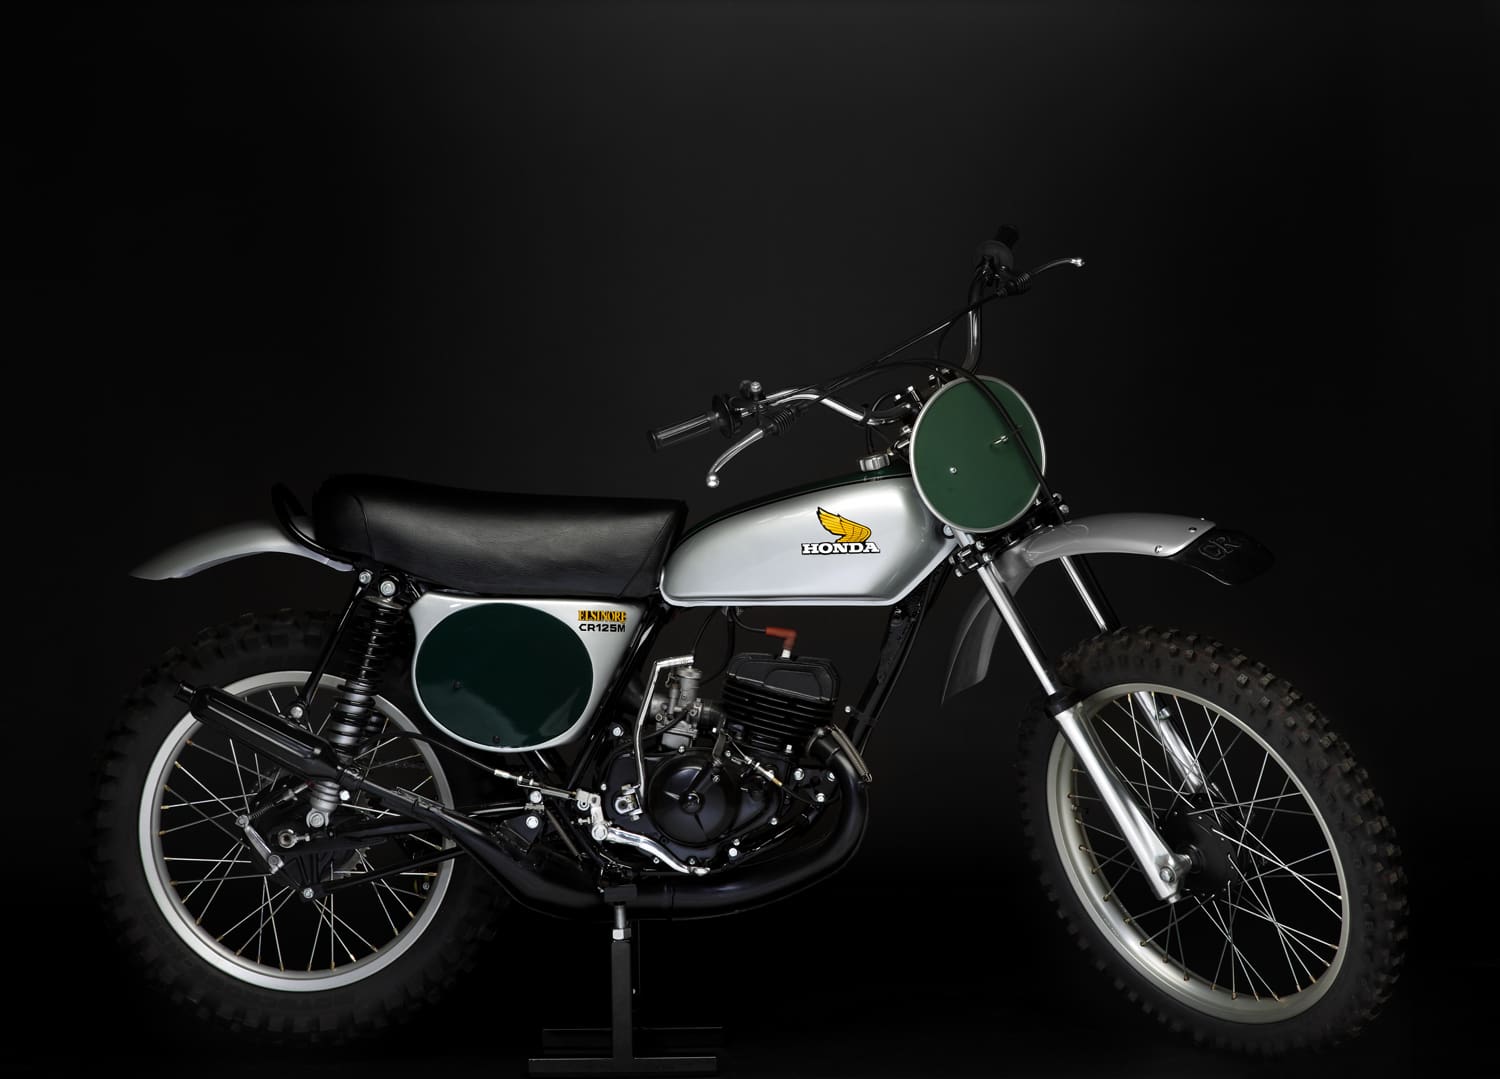 A white and green dirt bike on a black background.